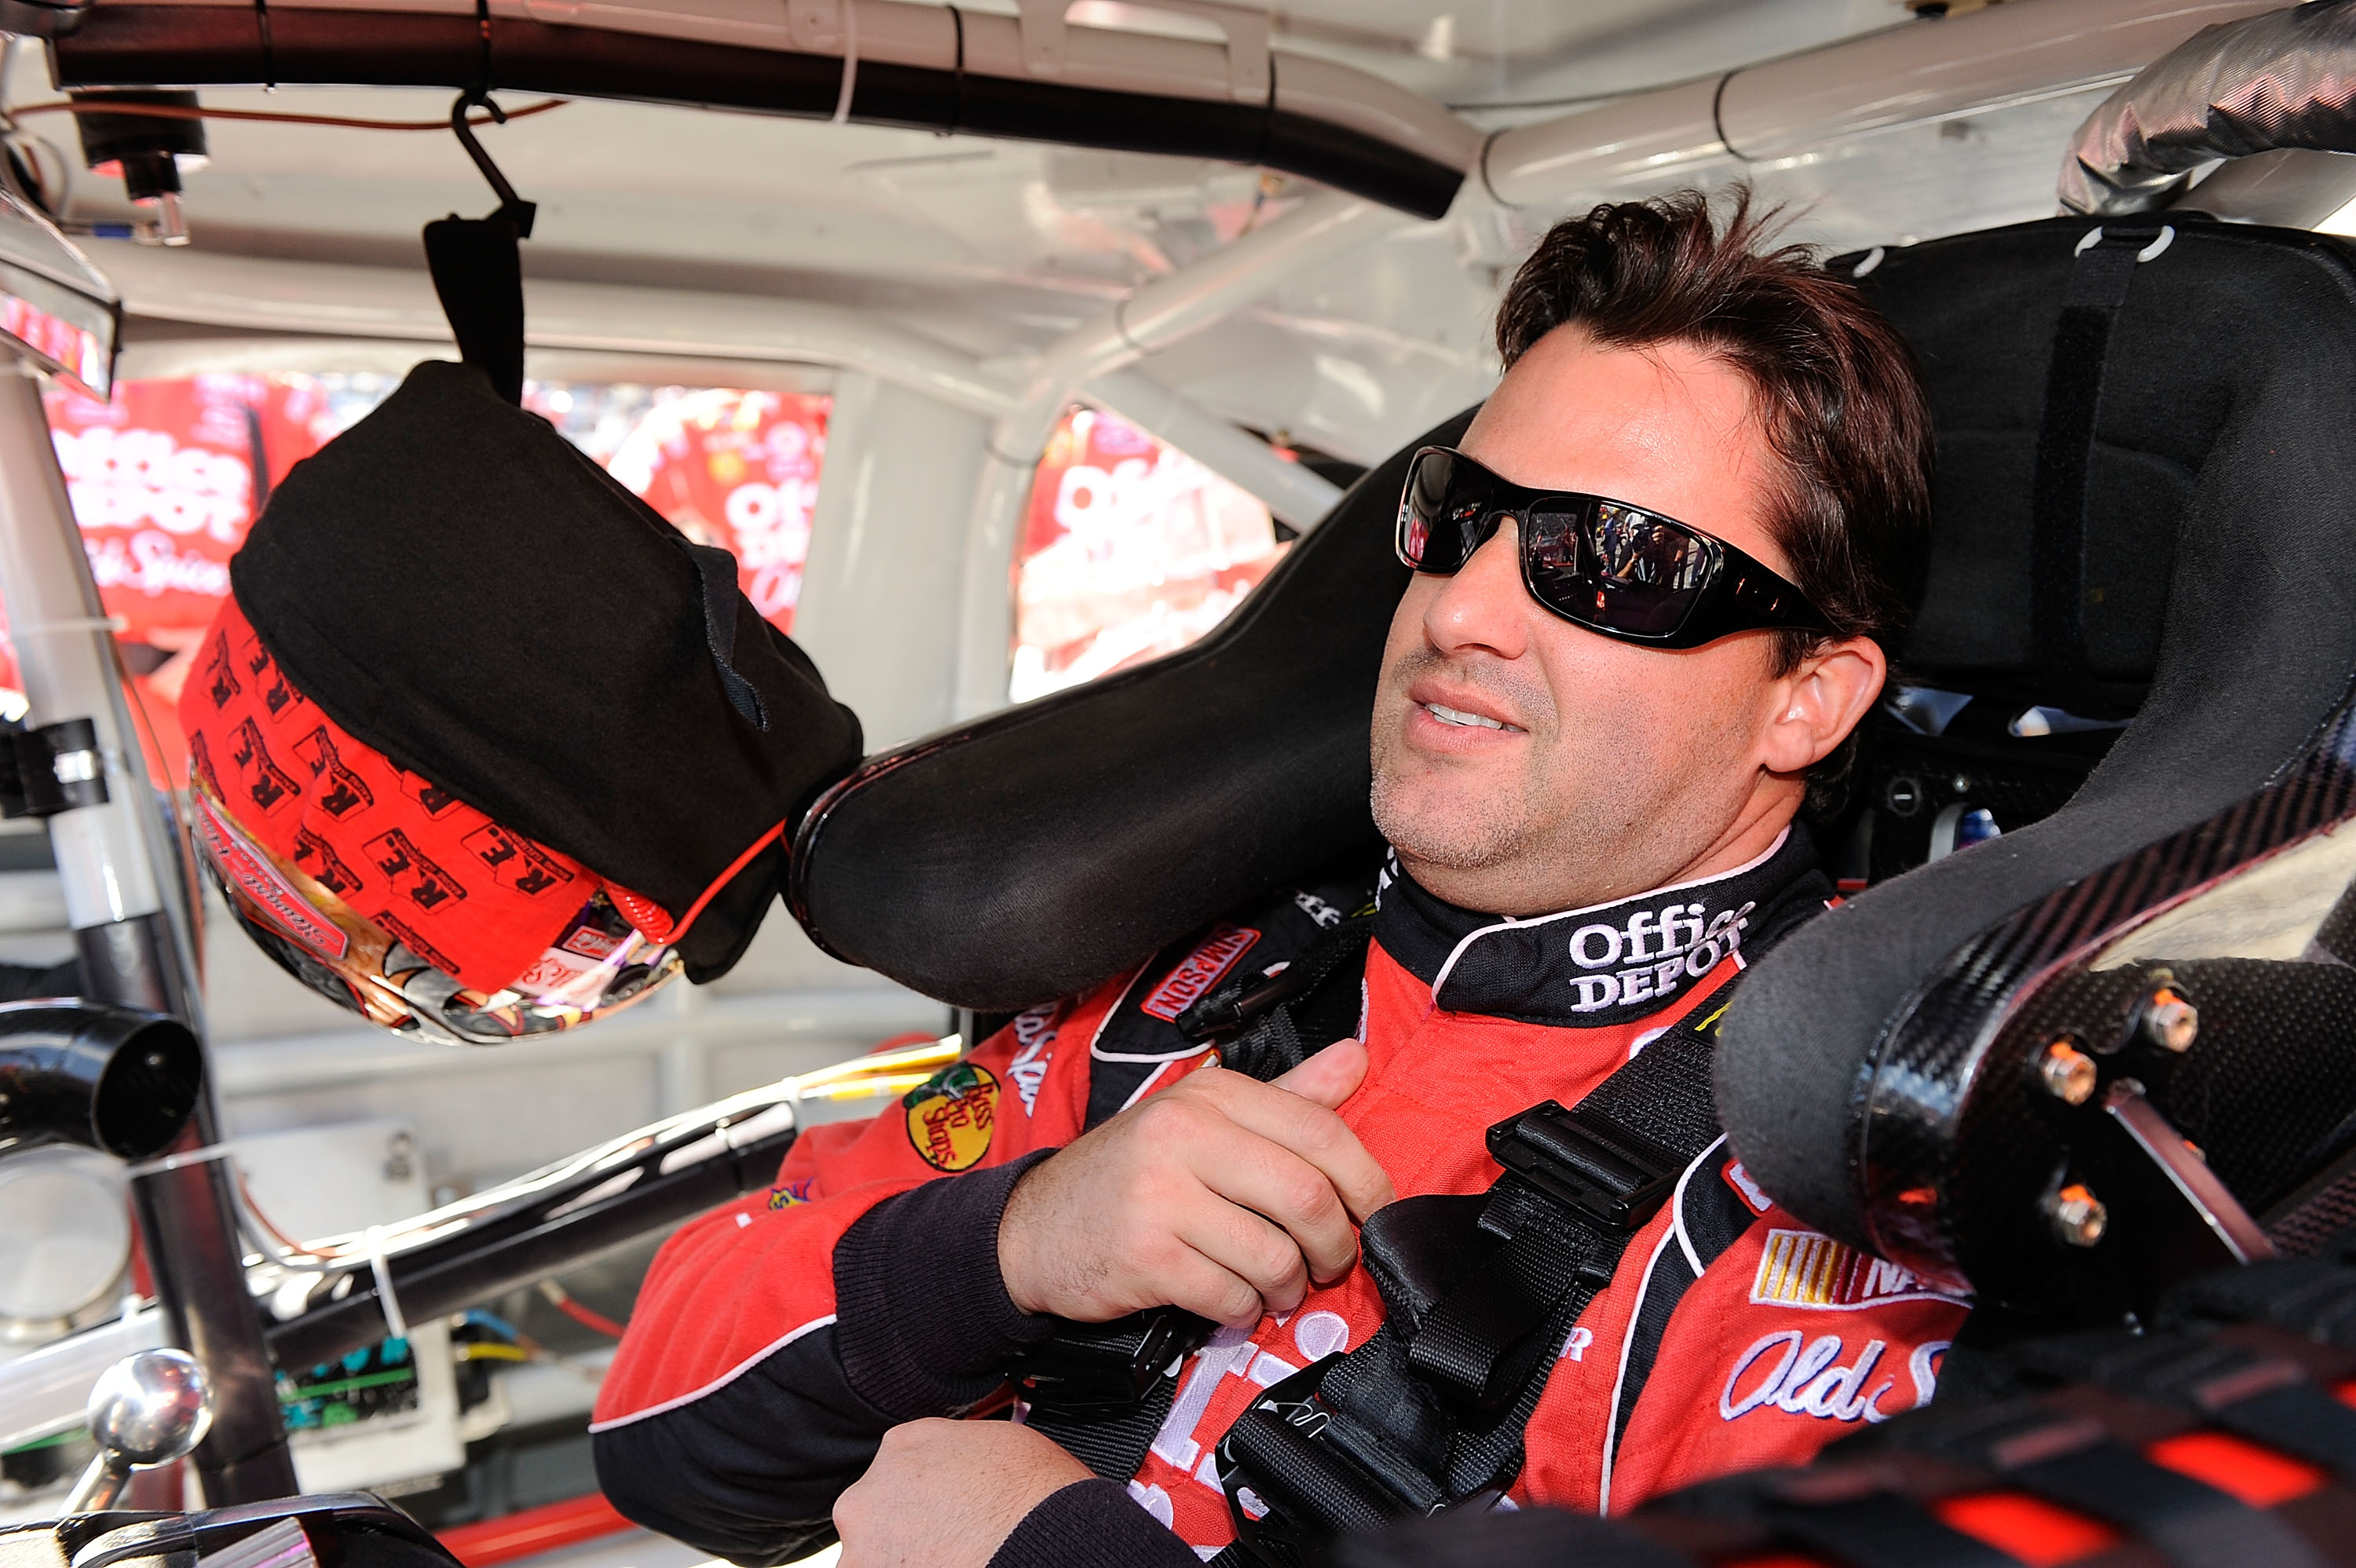 MARTINSVILLE, VA - OCTOBER 24:  Tony Stewart, driver of the #14 Old Spice/Office Depot Chevrolet, sits in his car prior to the start of the NASCAR Sprint Cup Series TUMS Fast Relief 500 at Martinsville Speedway on October 24, 2010 in Martinsville, Virgini